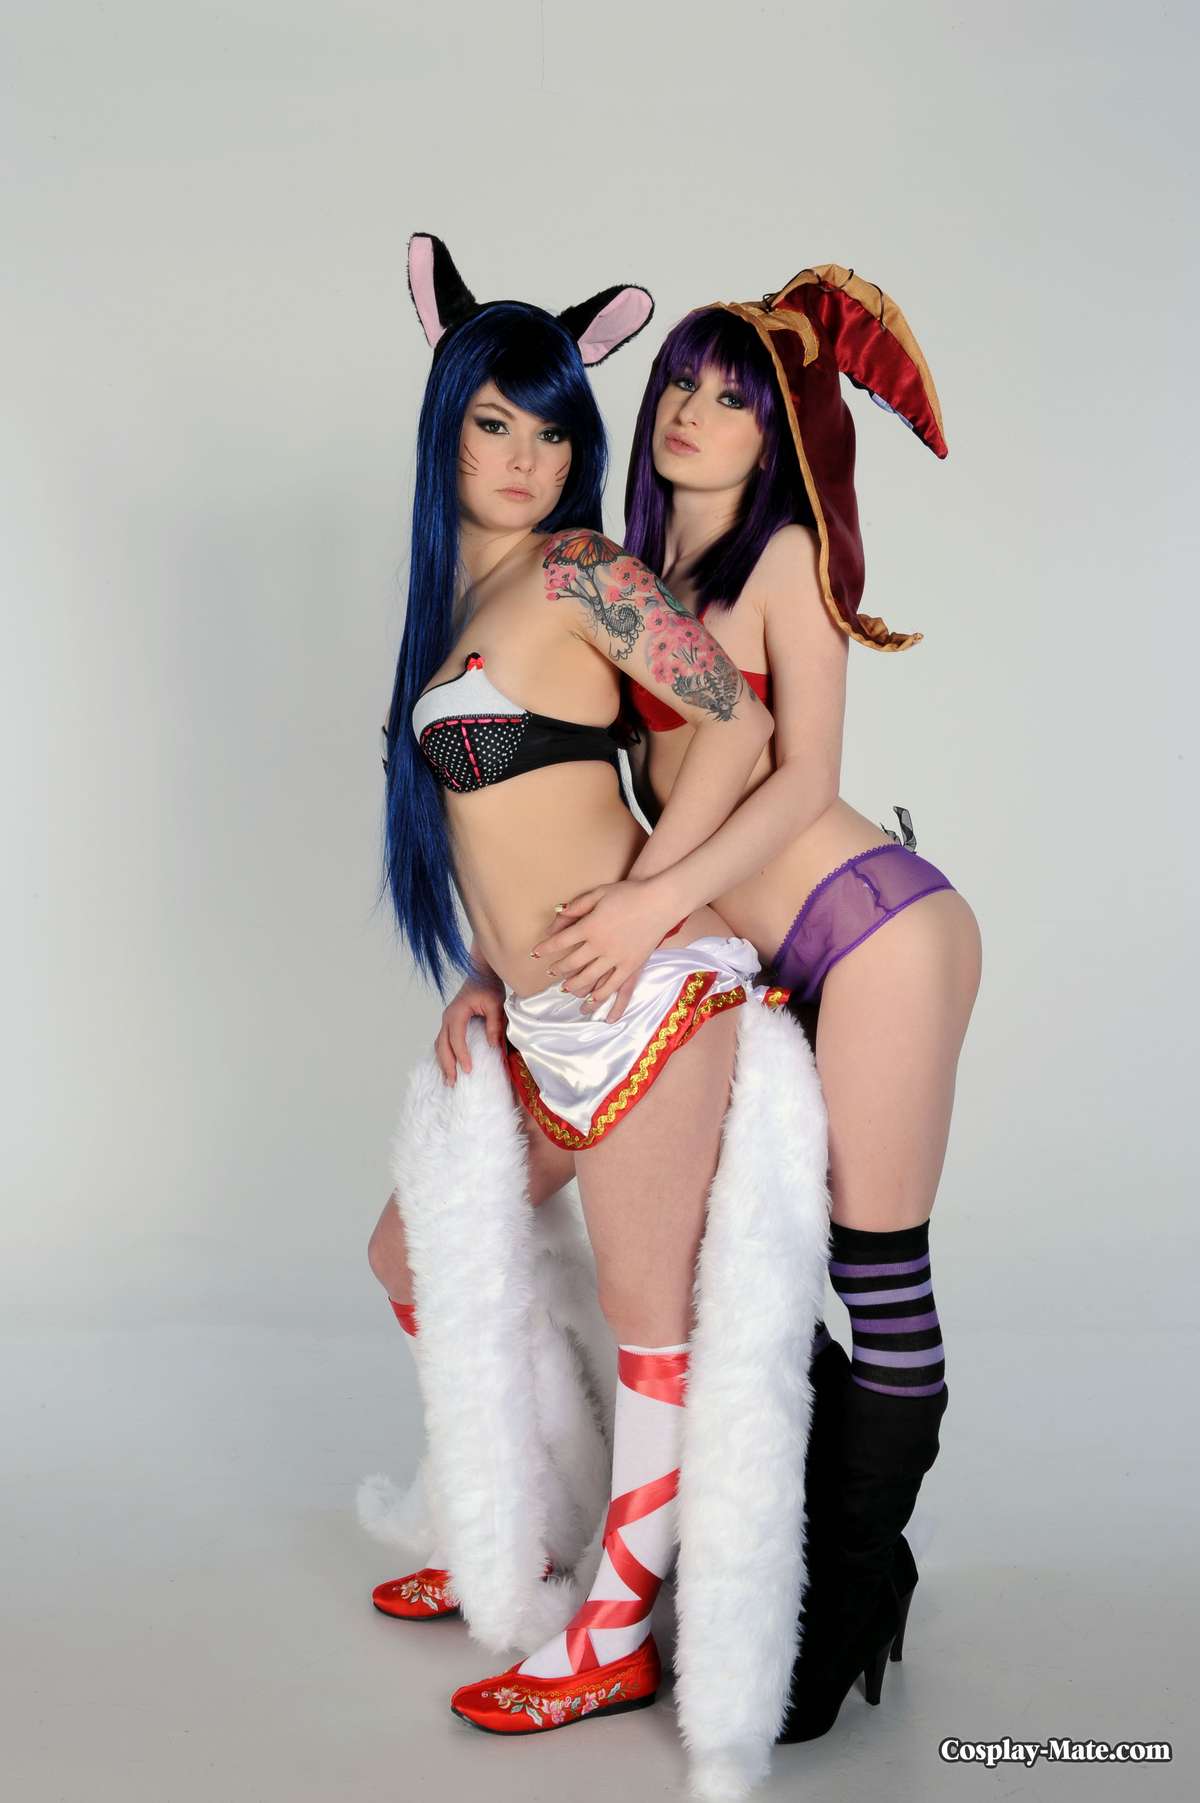 Ahri and Lulu Legends Cosplay for Cosplay Mate - Cherry Nudes.